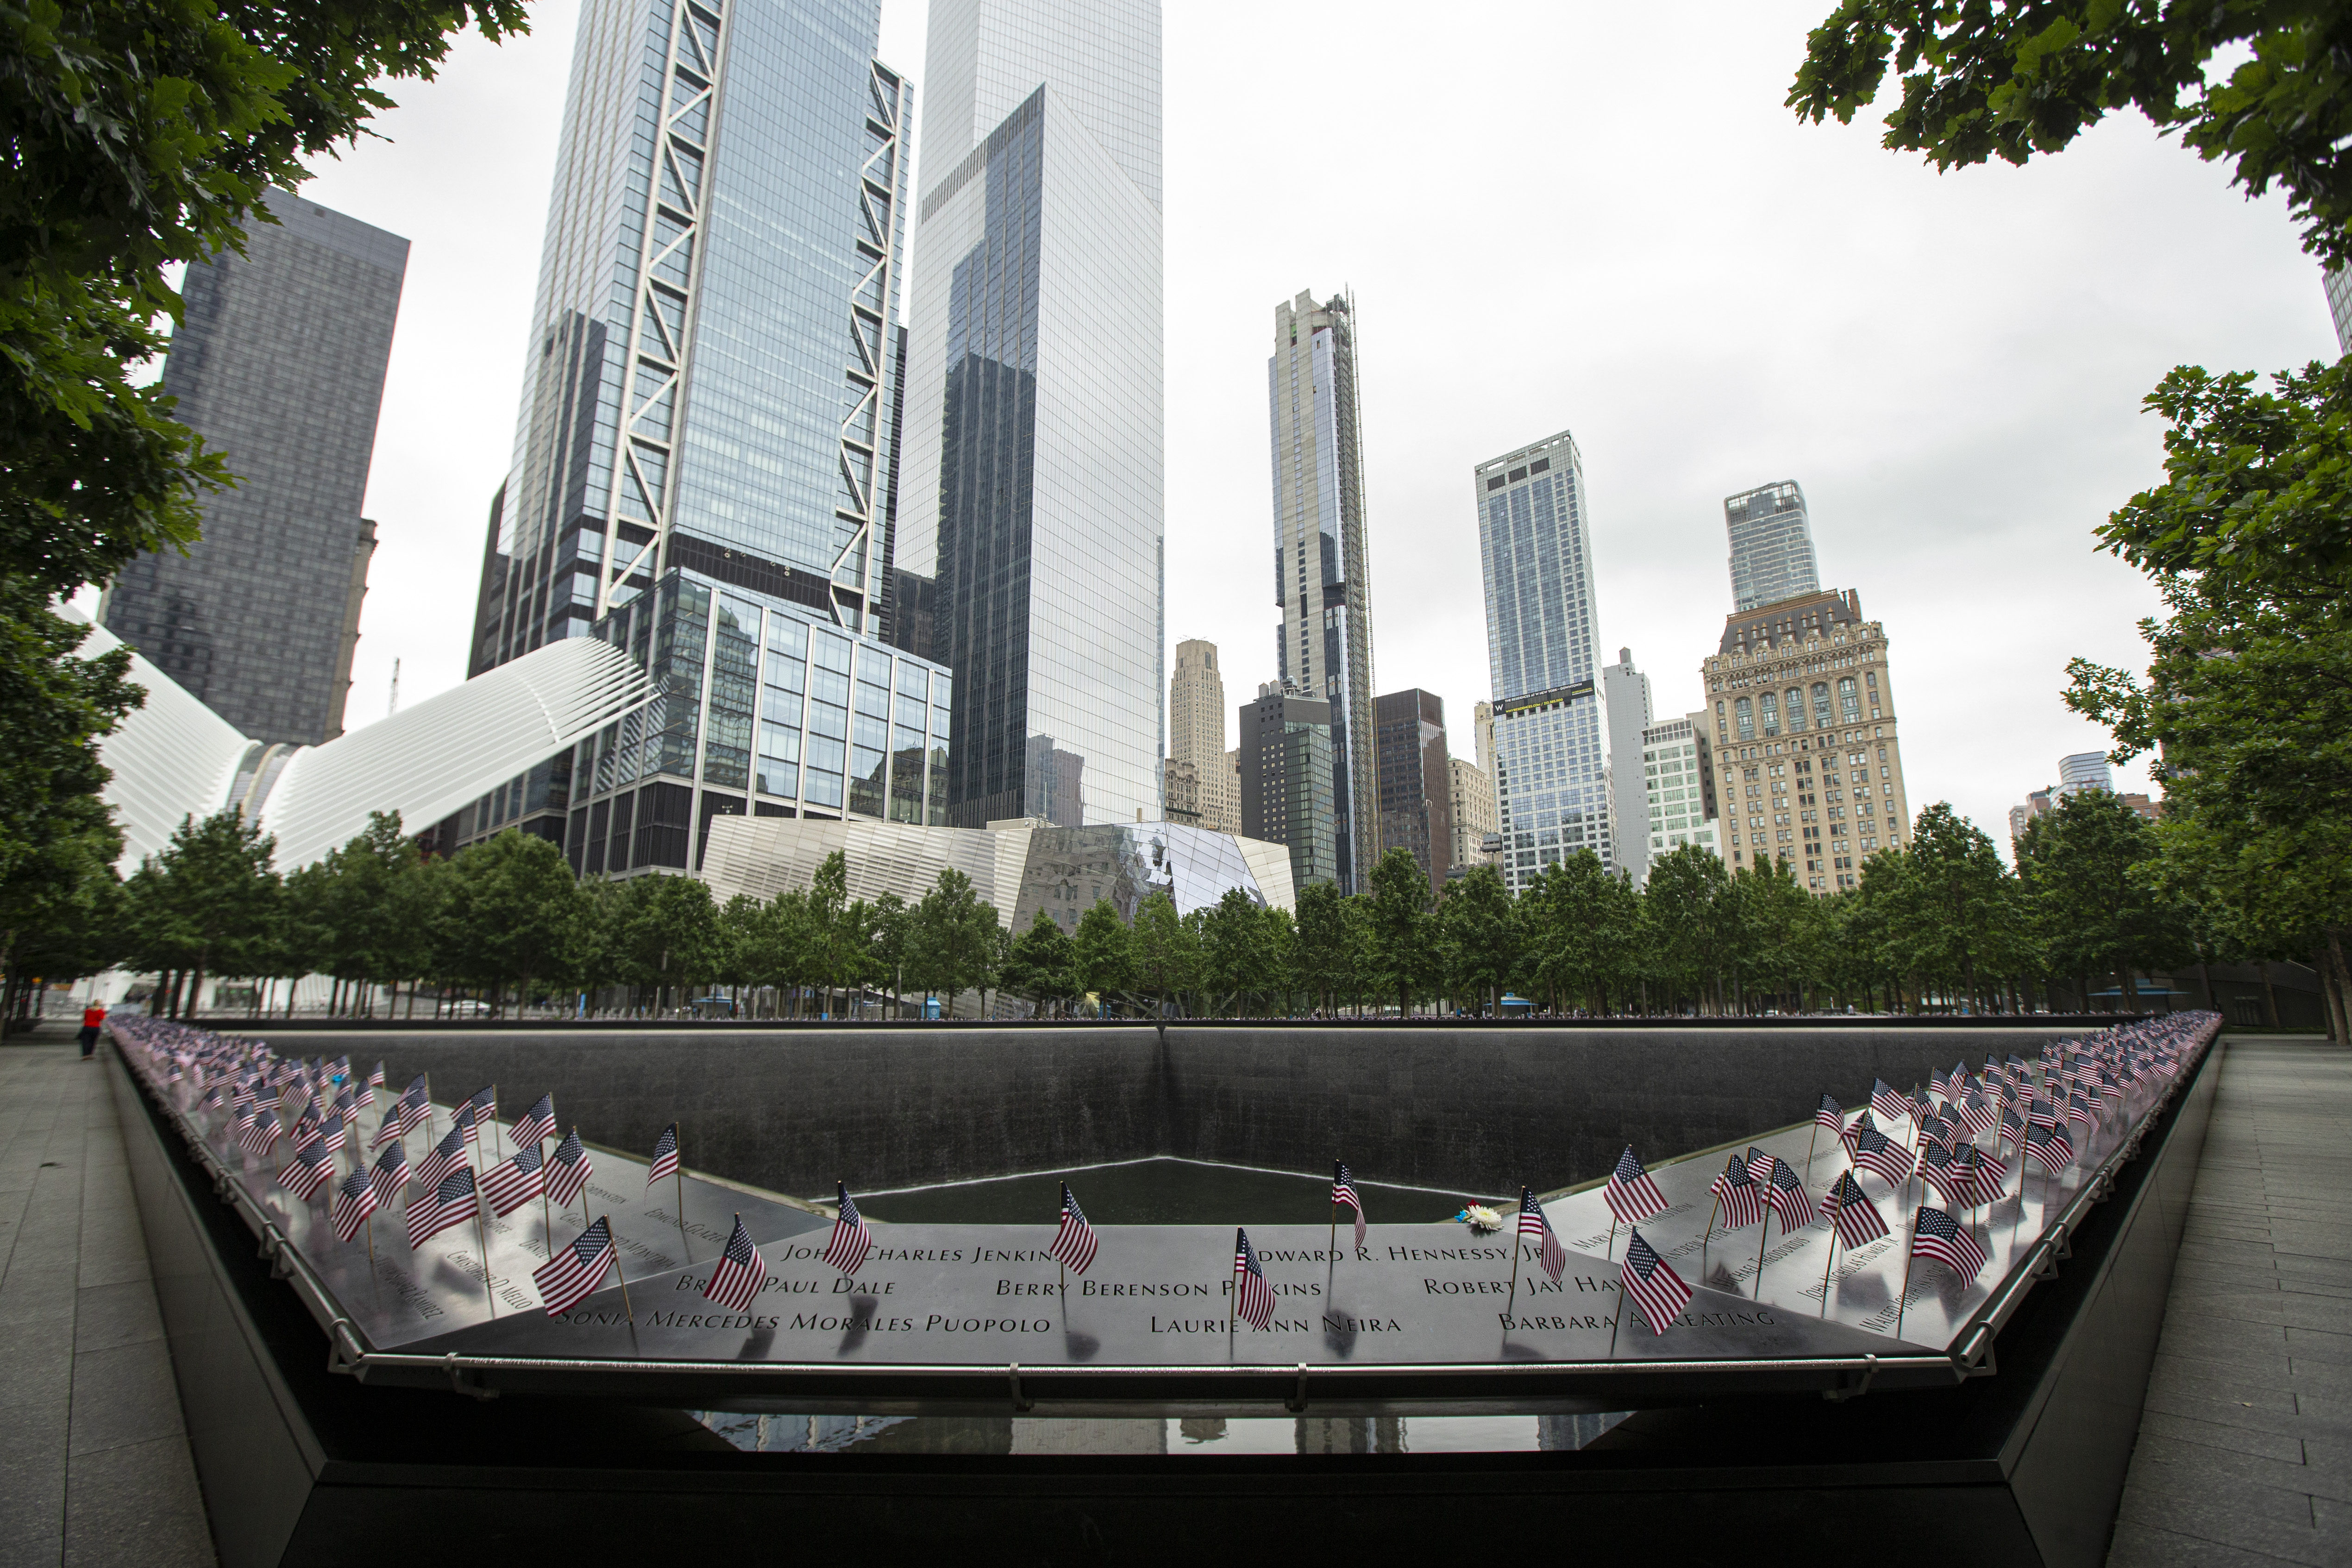 A low, marble square-shaped structure bearing the names of those who perished in the terrorist attacks on 9/11. Small American flags have been placed at each name. In the center of the structure is a deep pool. Tall skyscrapers in the background.